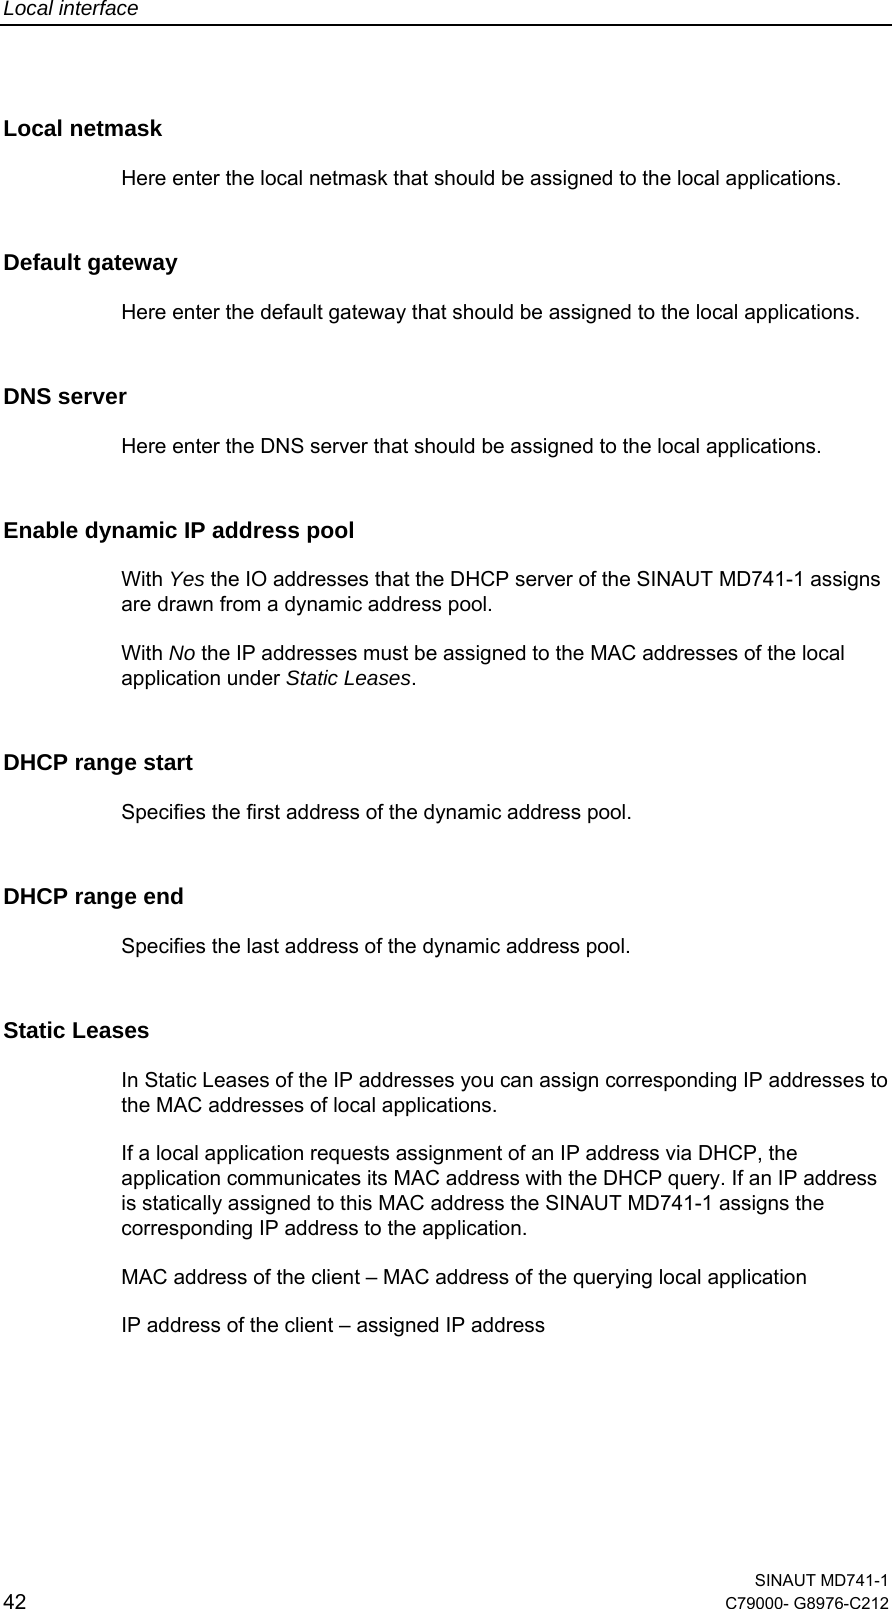 Local interface  SINAUT MD741-1 42  C79000- G8976-C212   Local netmask Here enter the local netmask that should be assigned to the local applications. Default gateway Here enter the default gateway that should be assigned to the local applications. DNS server Here enter the DNS server that should be assigned to the local applications. Enable dynamic IP address pool With Yes the IO addresses that the DHCP server of the SINAUT MD741-1 assigns are drawn from a dynamic address pool. With No the IP addresses must be assigned to the MAC addresses of the local application under Static Leases. DHCP range start Specifies the first address of the dynamic address pool. DHCP range end Specifies the last address of the dynamic address pool. Static Leases  In Static Leases of the IP addresses you can assign corresponding IP addresses to the MAC addresses of local applications. If a local application requests assignment of an IP address via DHCP, the application communicates its MAC address with the DHCP query. If an IP address is statically assigned to this MAC address the SINAUT MD741-1 assigns the corresponding IP address to the application.  MAC address of the client – MAC address of the querying local application IP address of the client – assigned IP address 